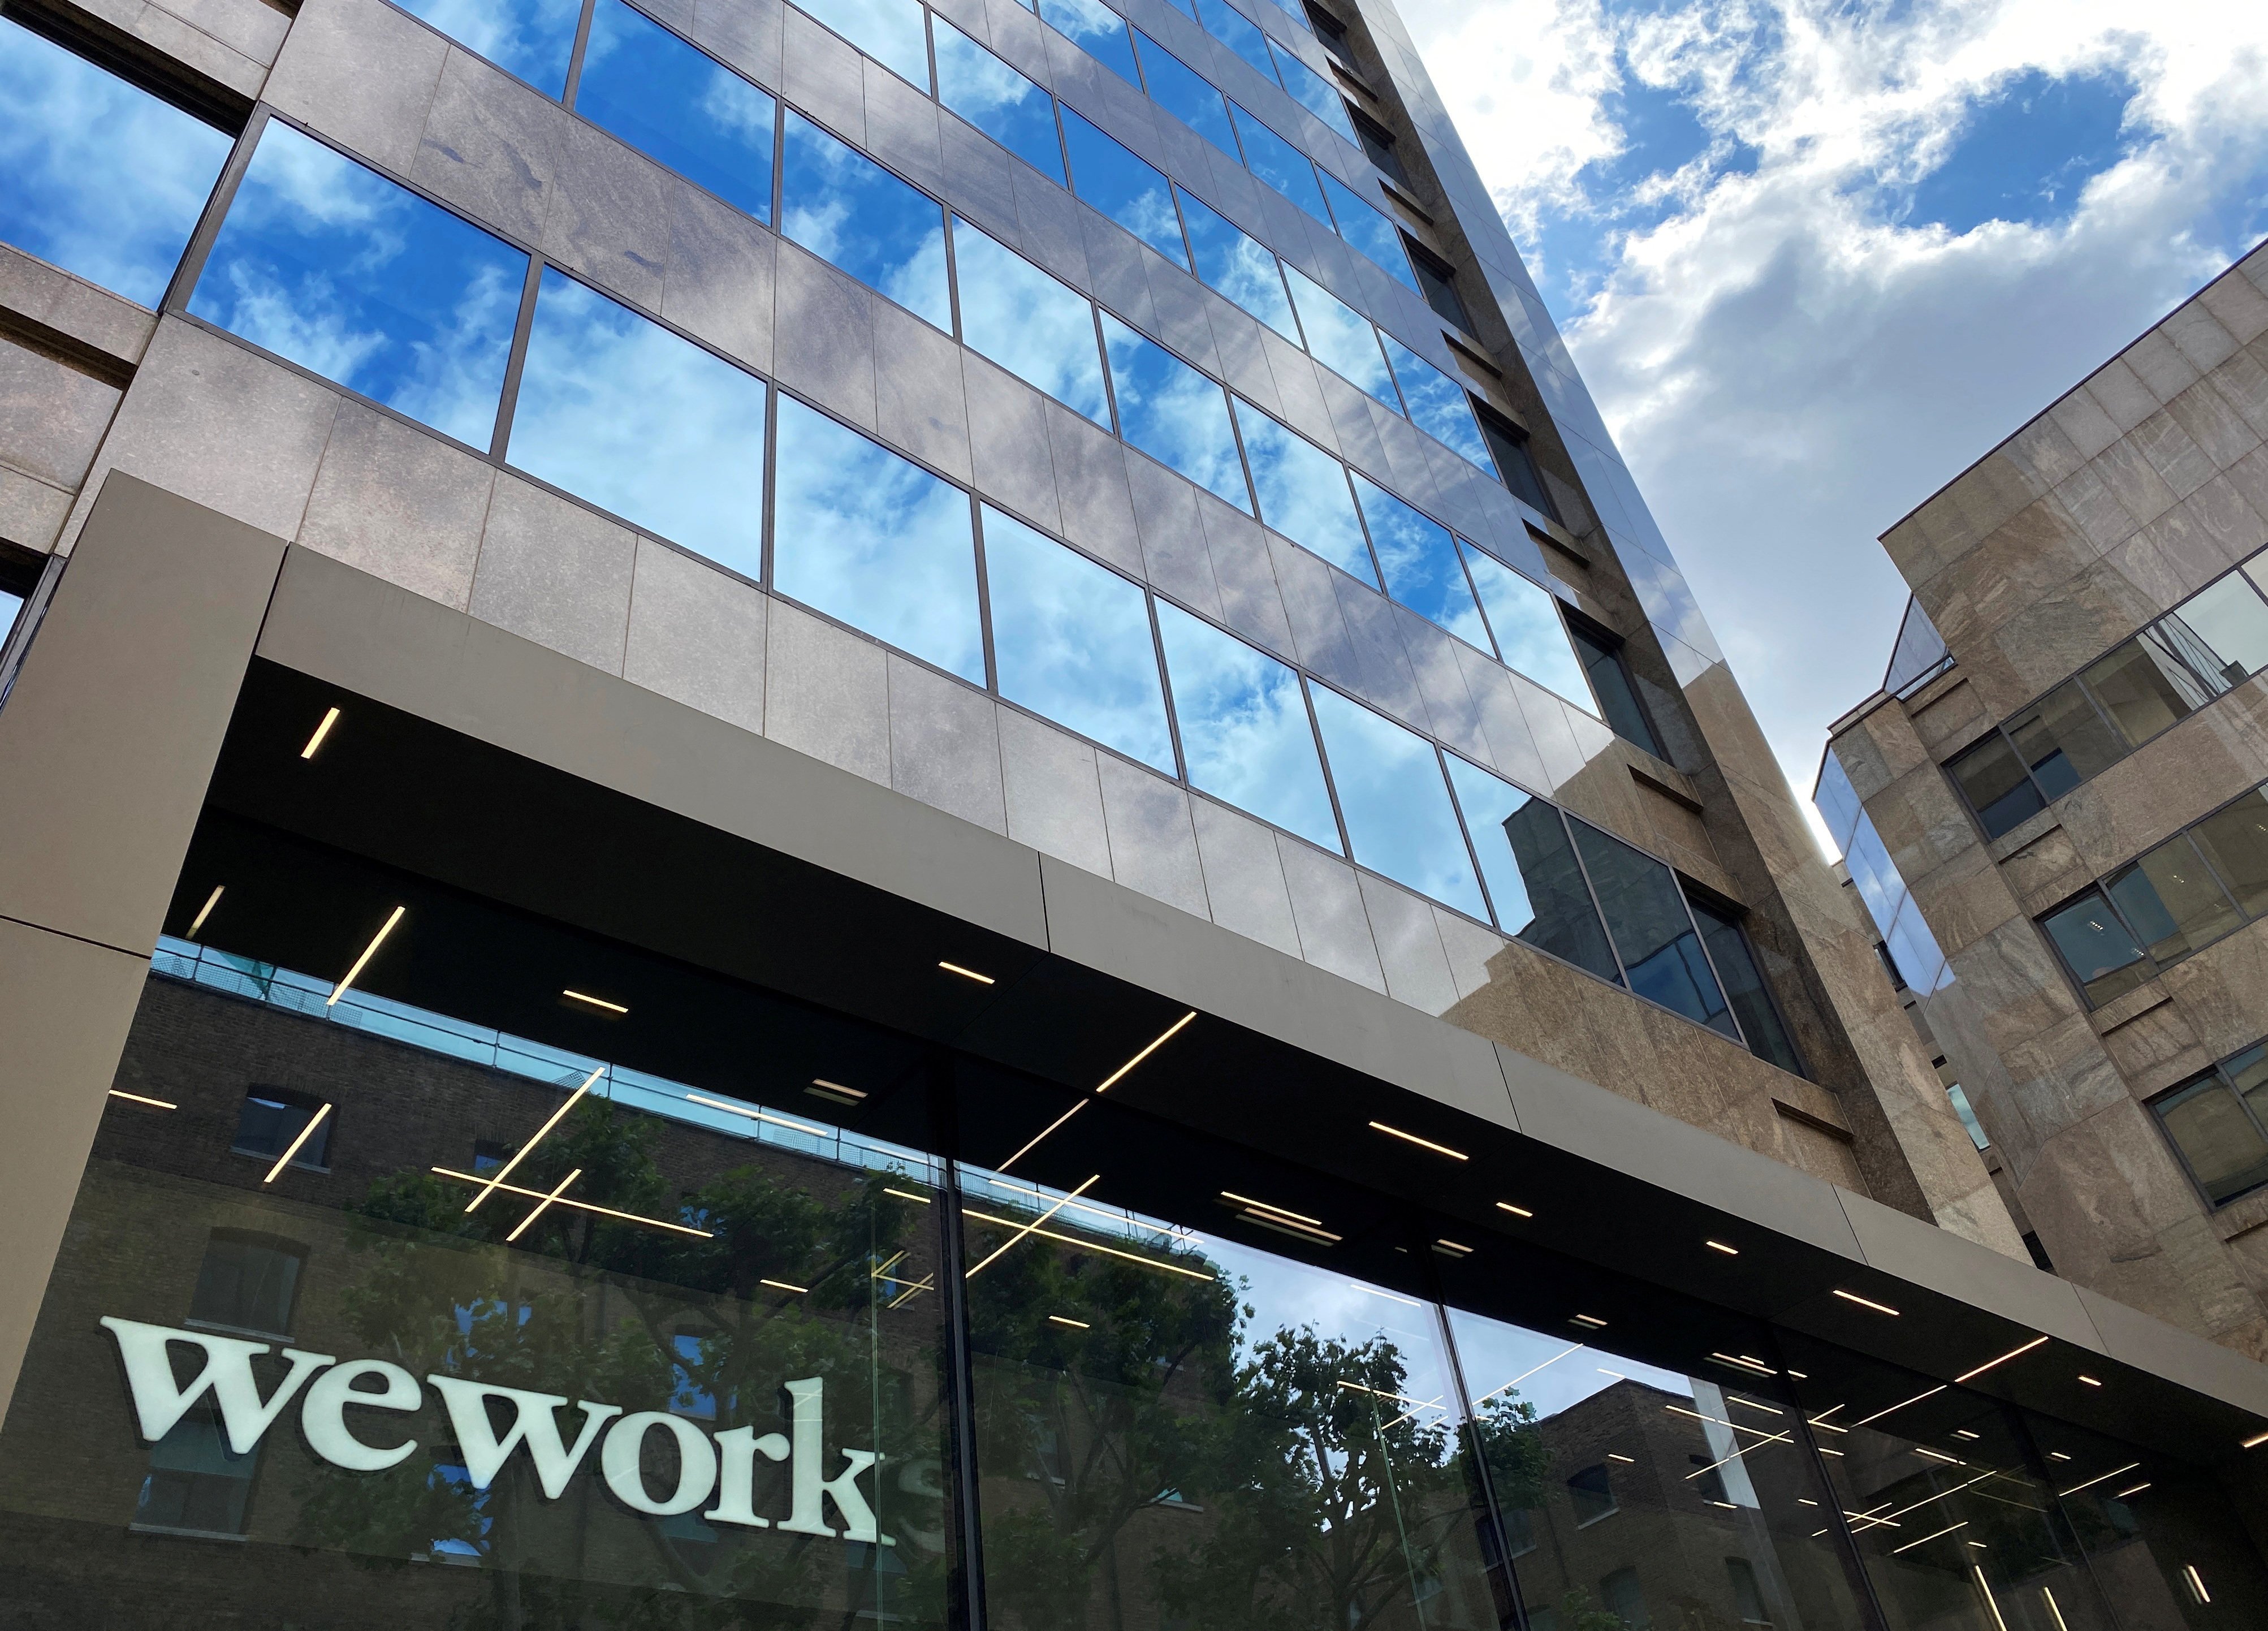 The logo of WeWork is seen in the window of an office building in London on July 3, 2020. Photo: Reuters